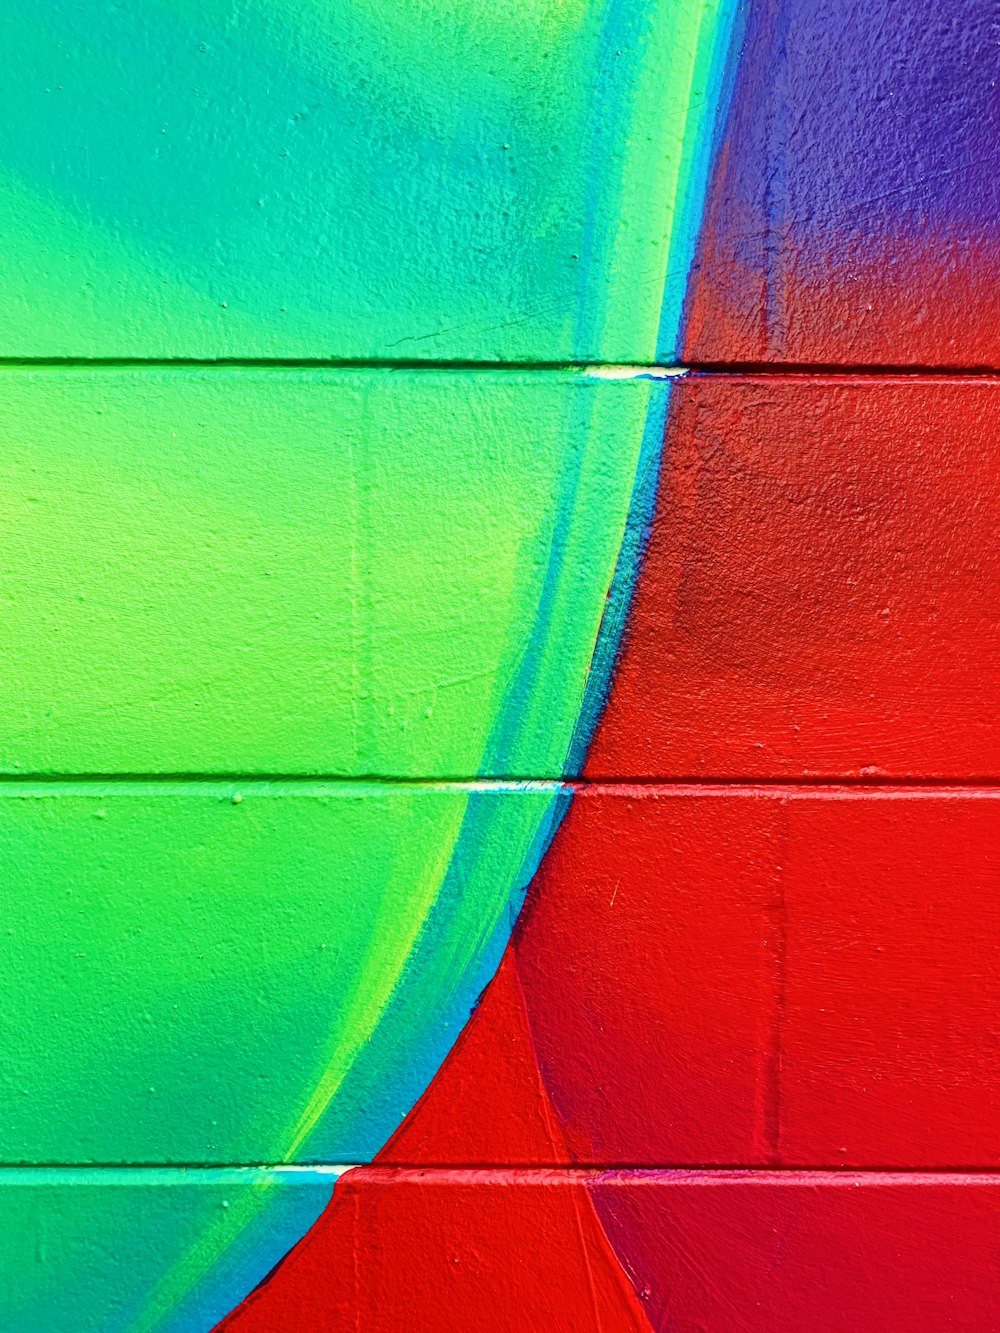 green, blue, and red painted brick wall